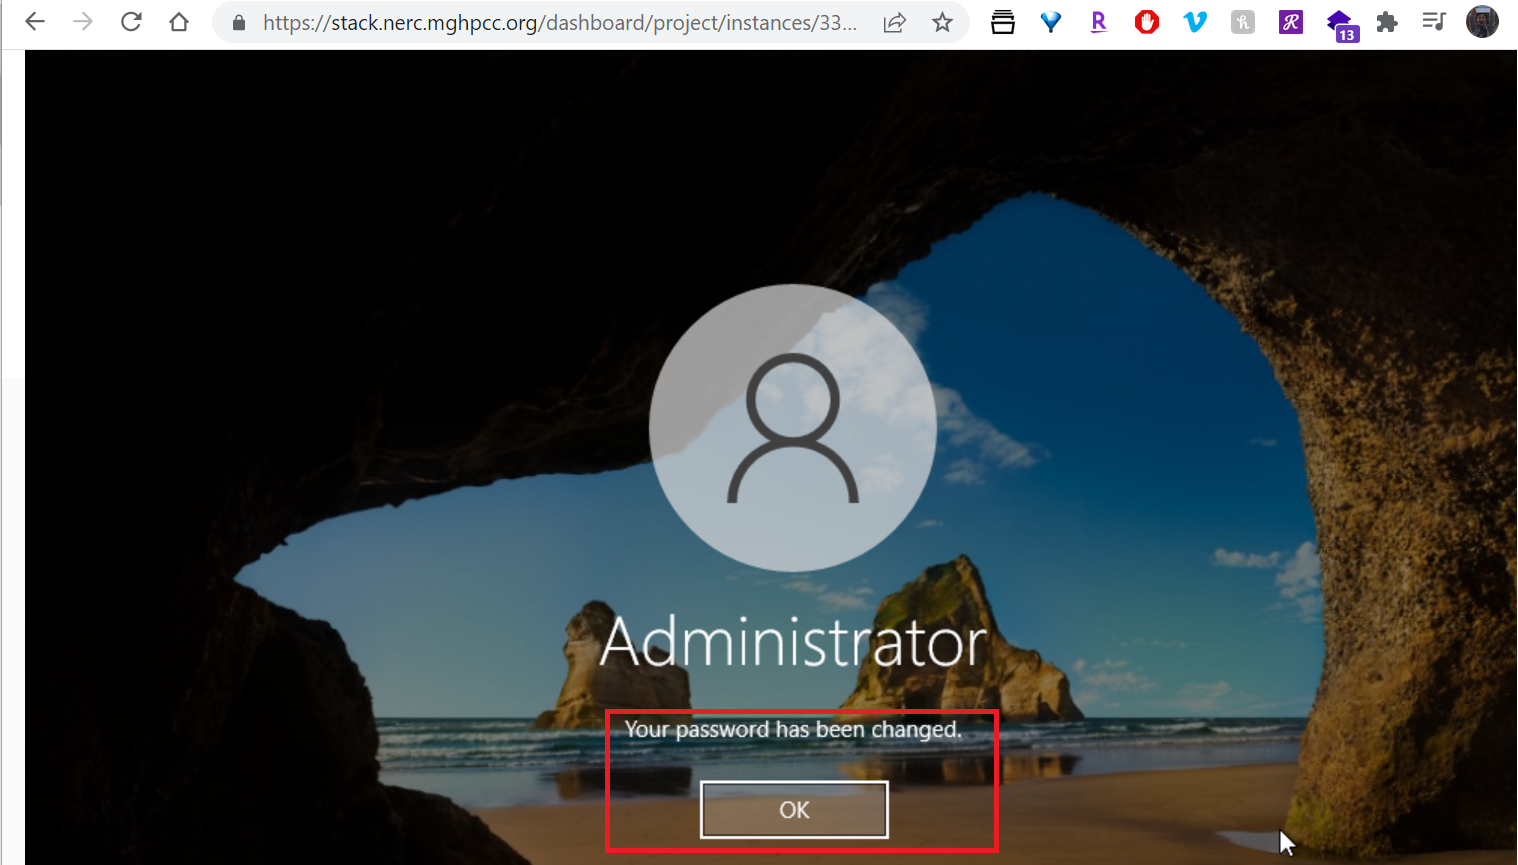 Administrator Password Changed Successful